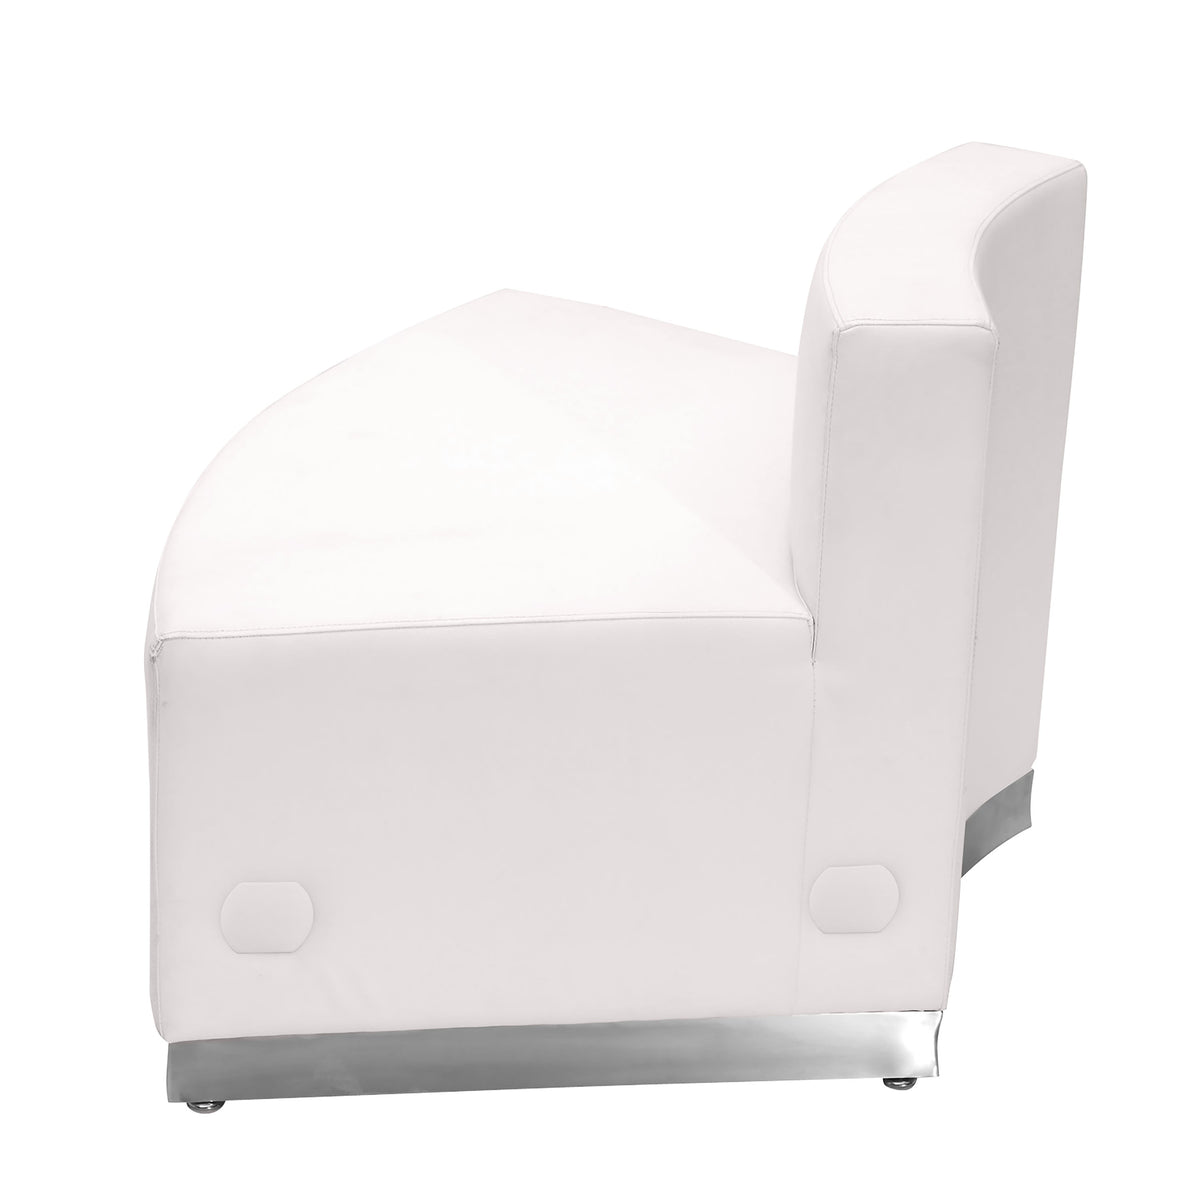 Melrose White |#| White LeatherSoft Convex Chair w/Stainless Steel Base - Reception Furniture